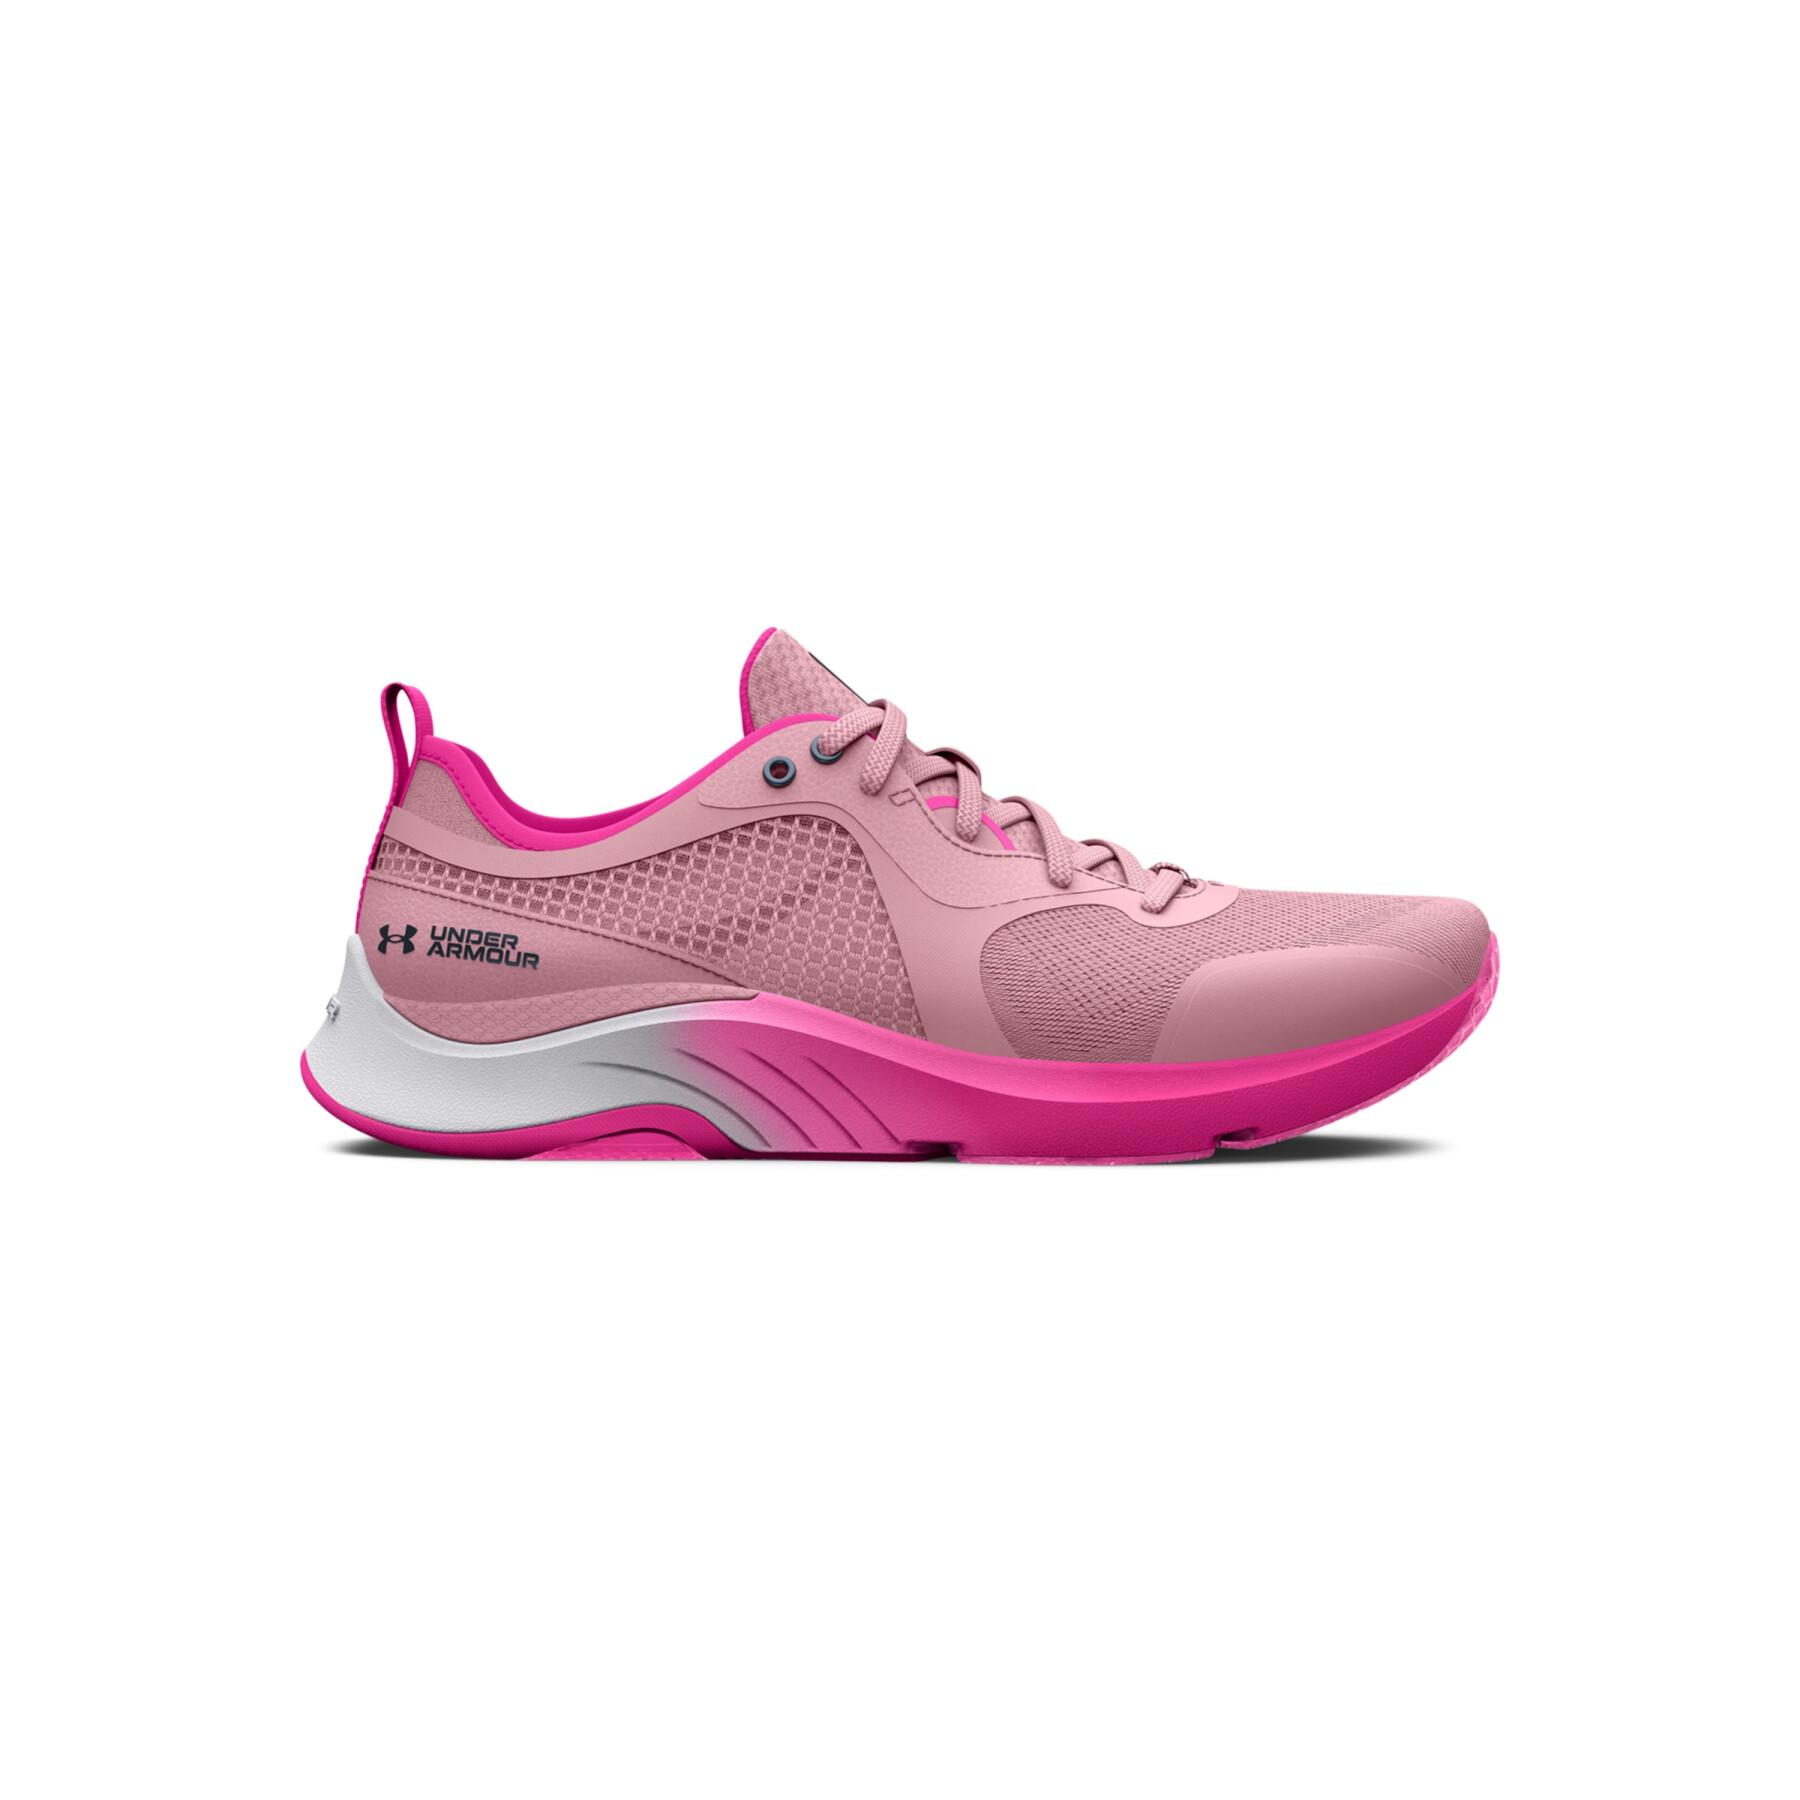 Women's running shoes Under Armour HOVR Omnia Q1